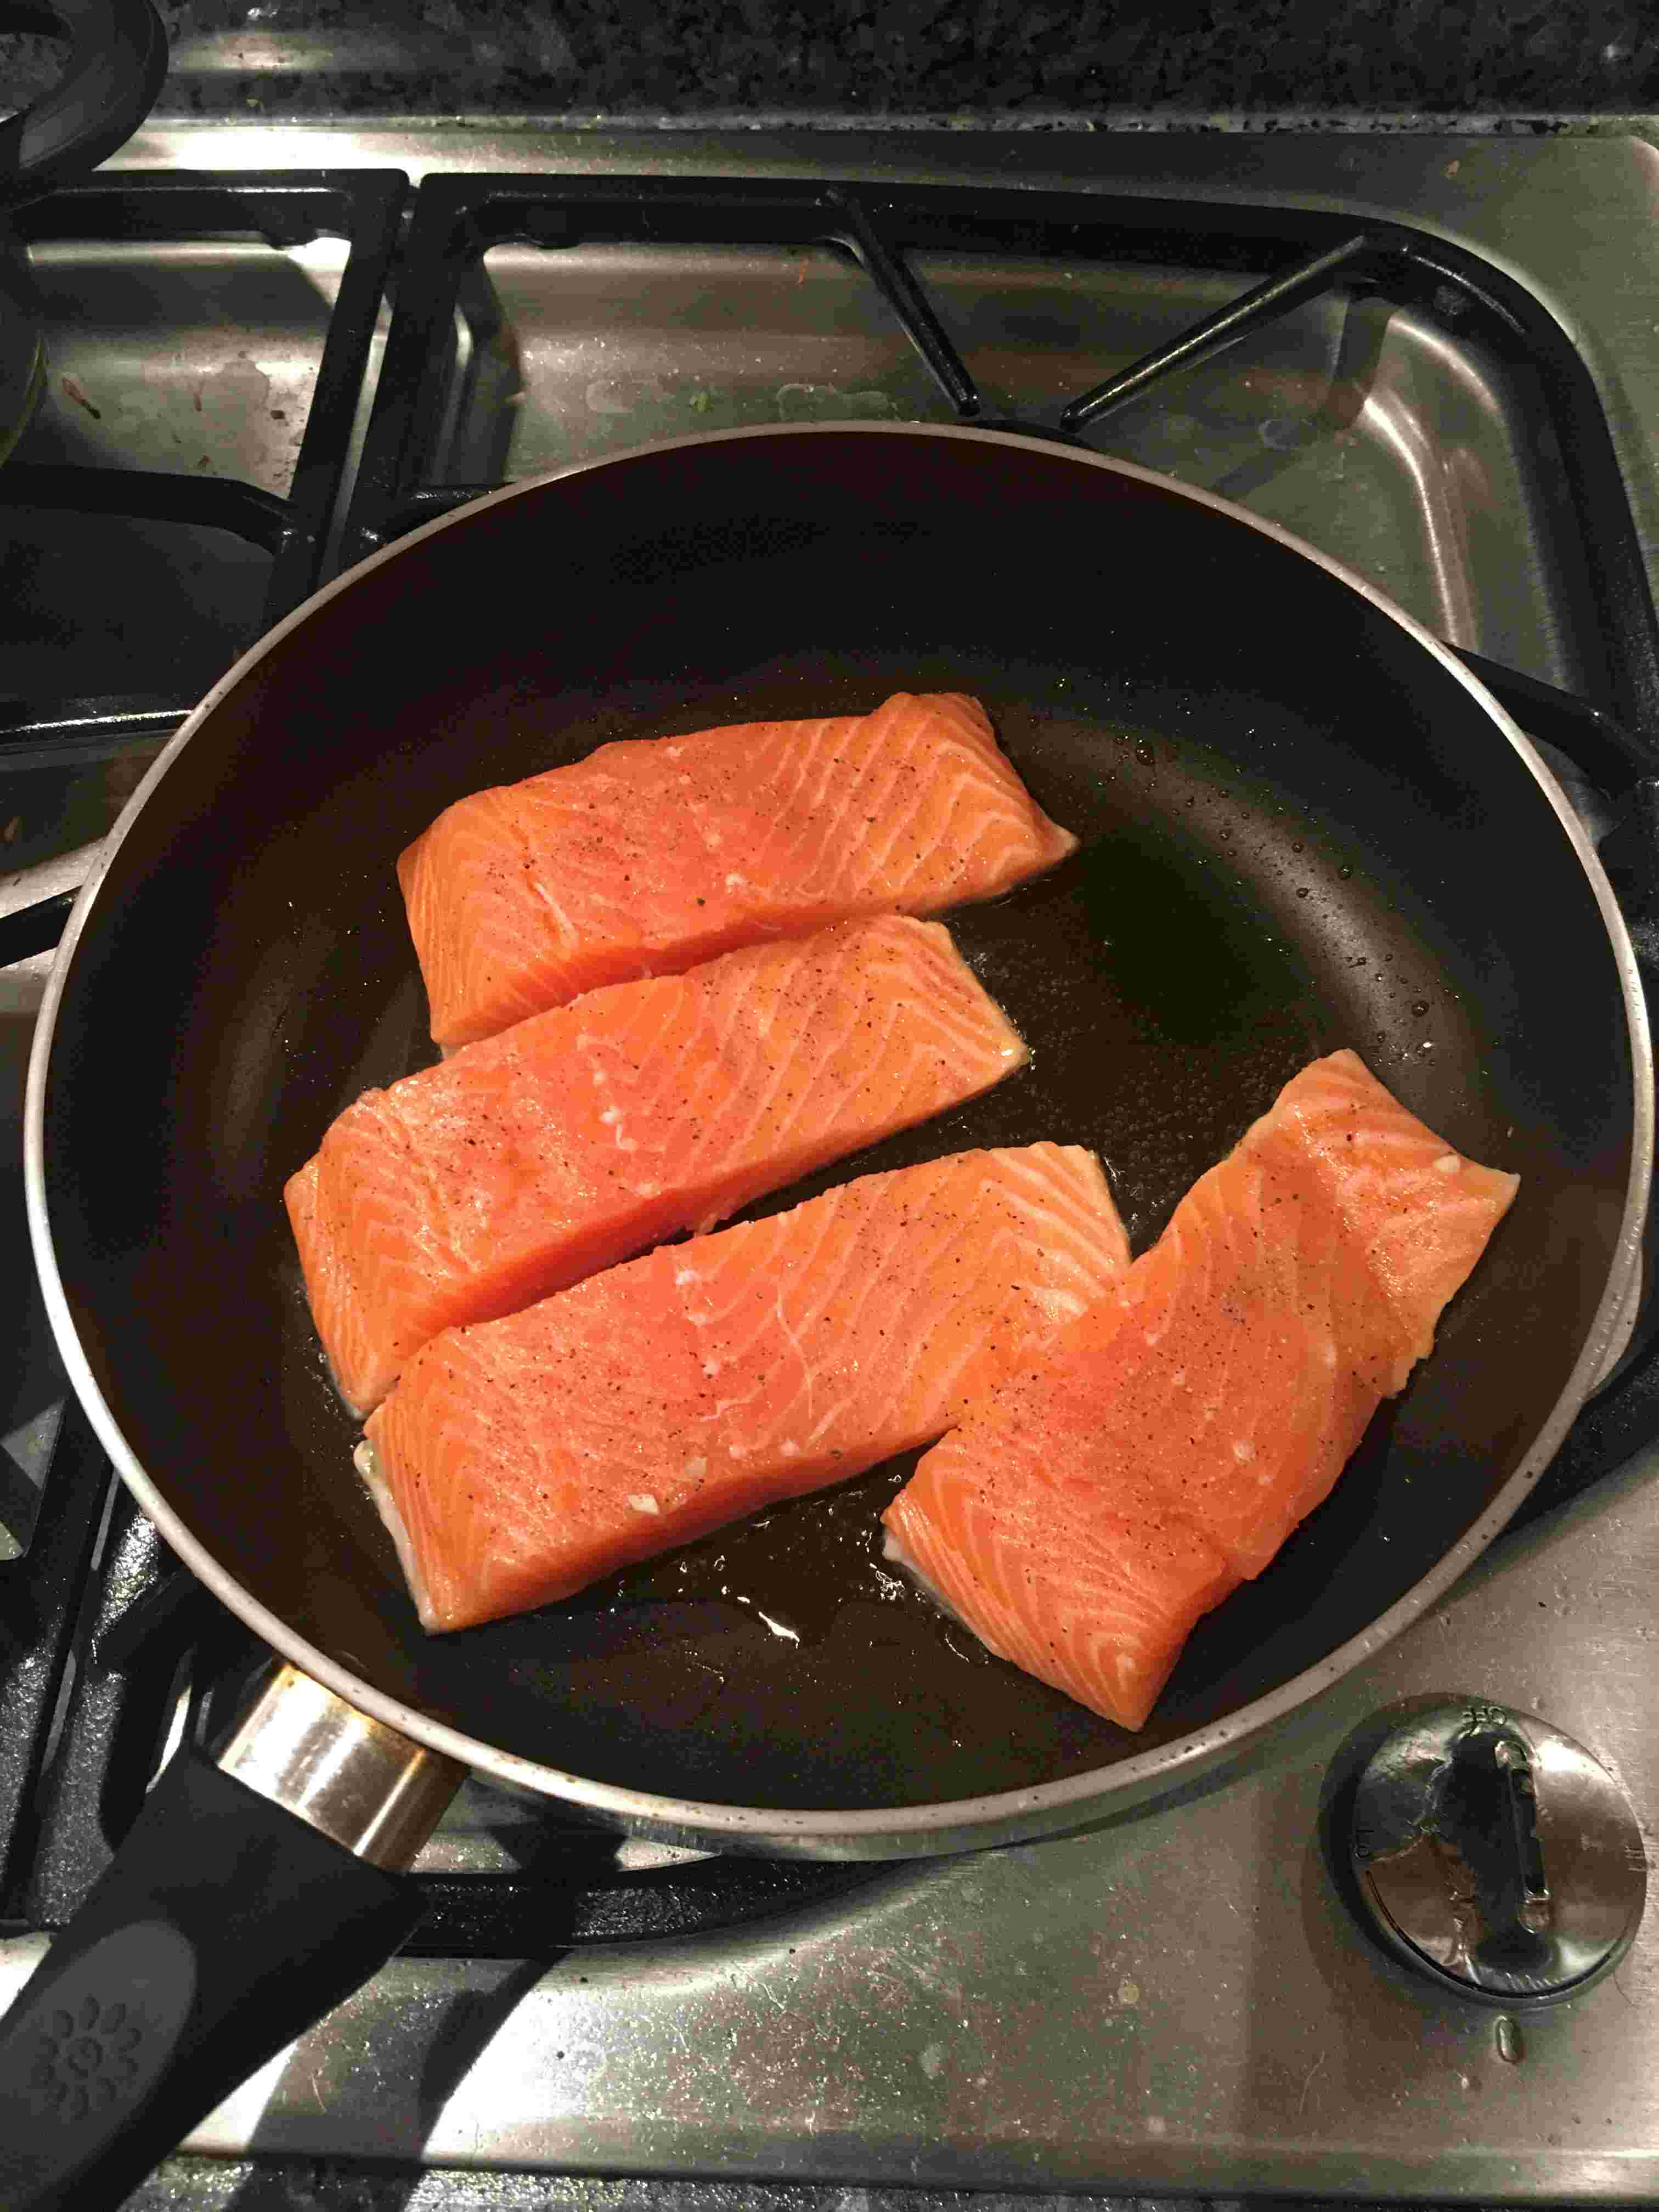 Whoops, one piece of salmon is a bit askew. Oh well. Don't touch the salmon!